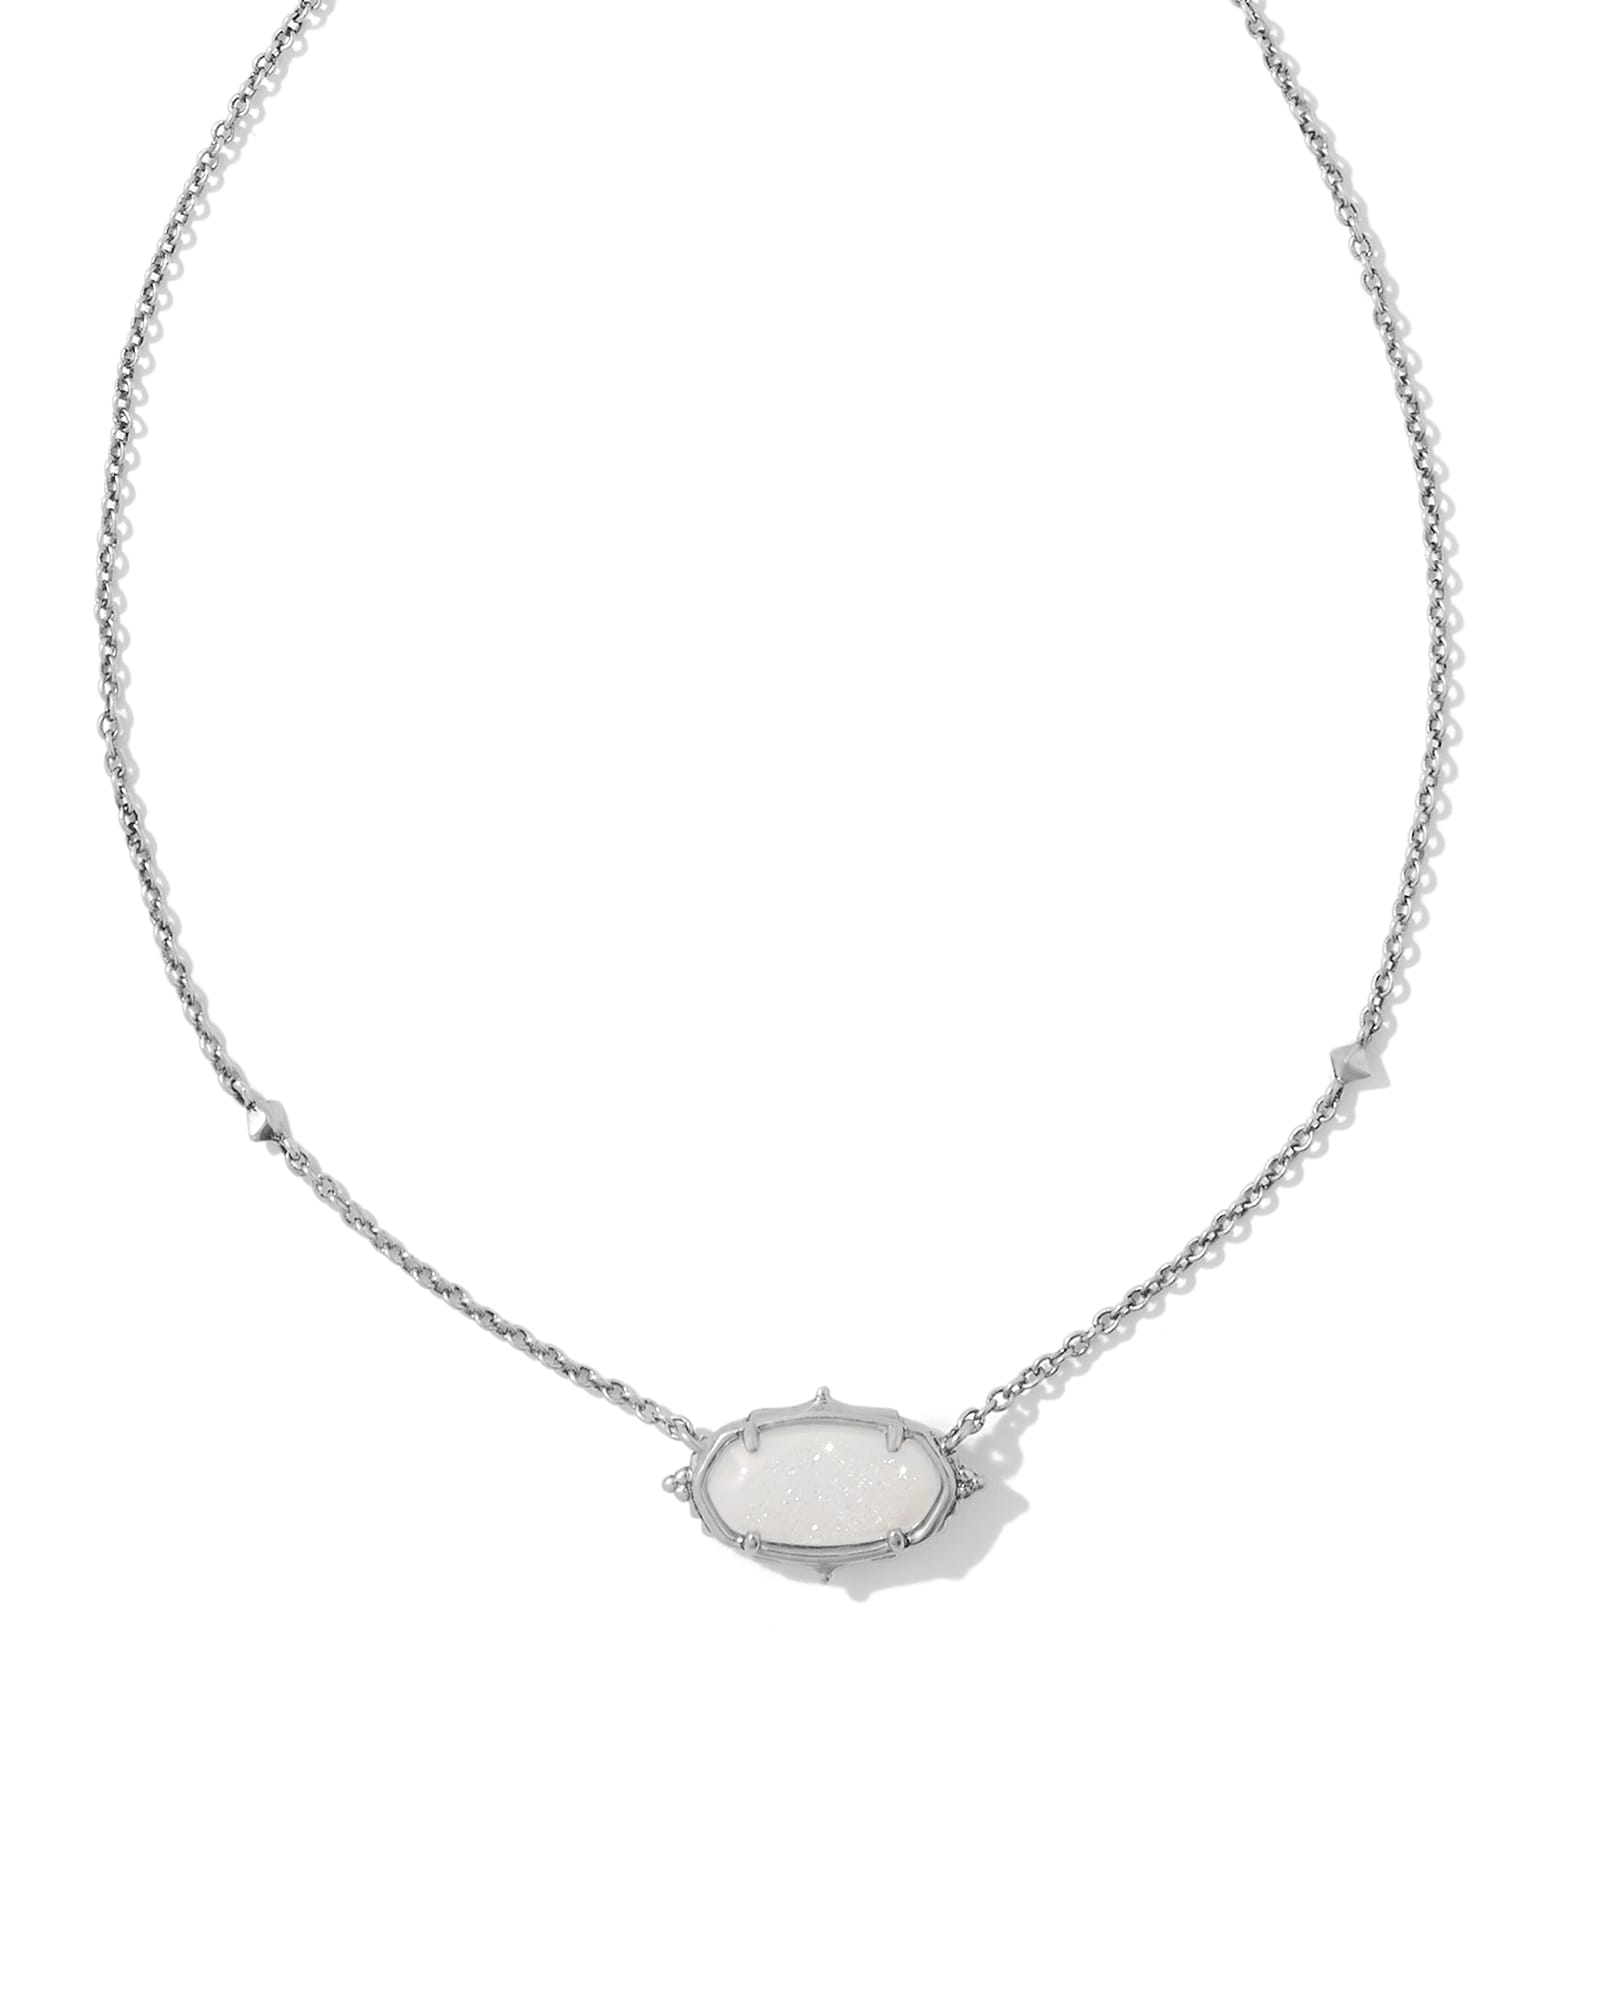 Everleigh Gold Pearl Pendant Necklace in White Pearl | Kendra Scott